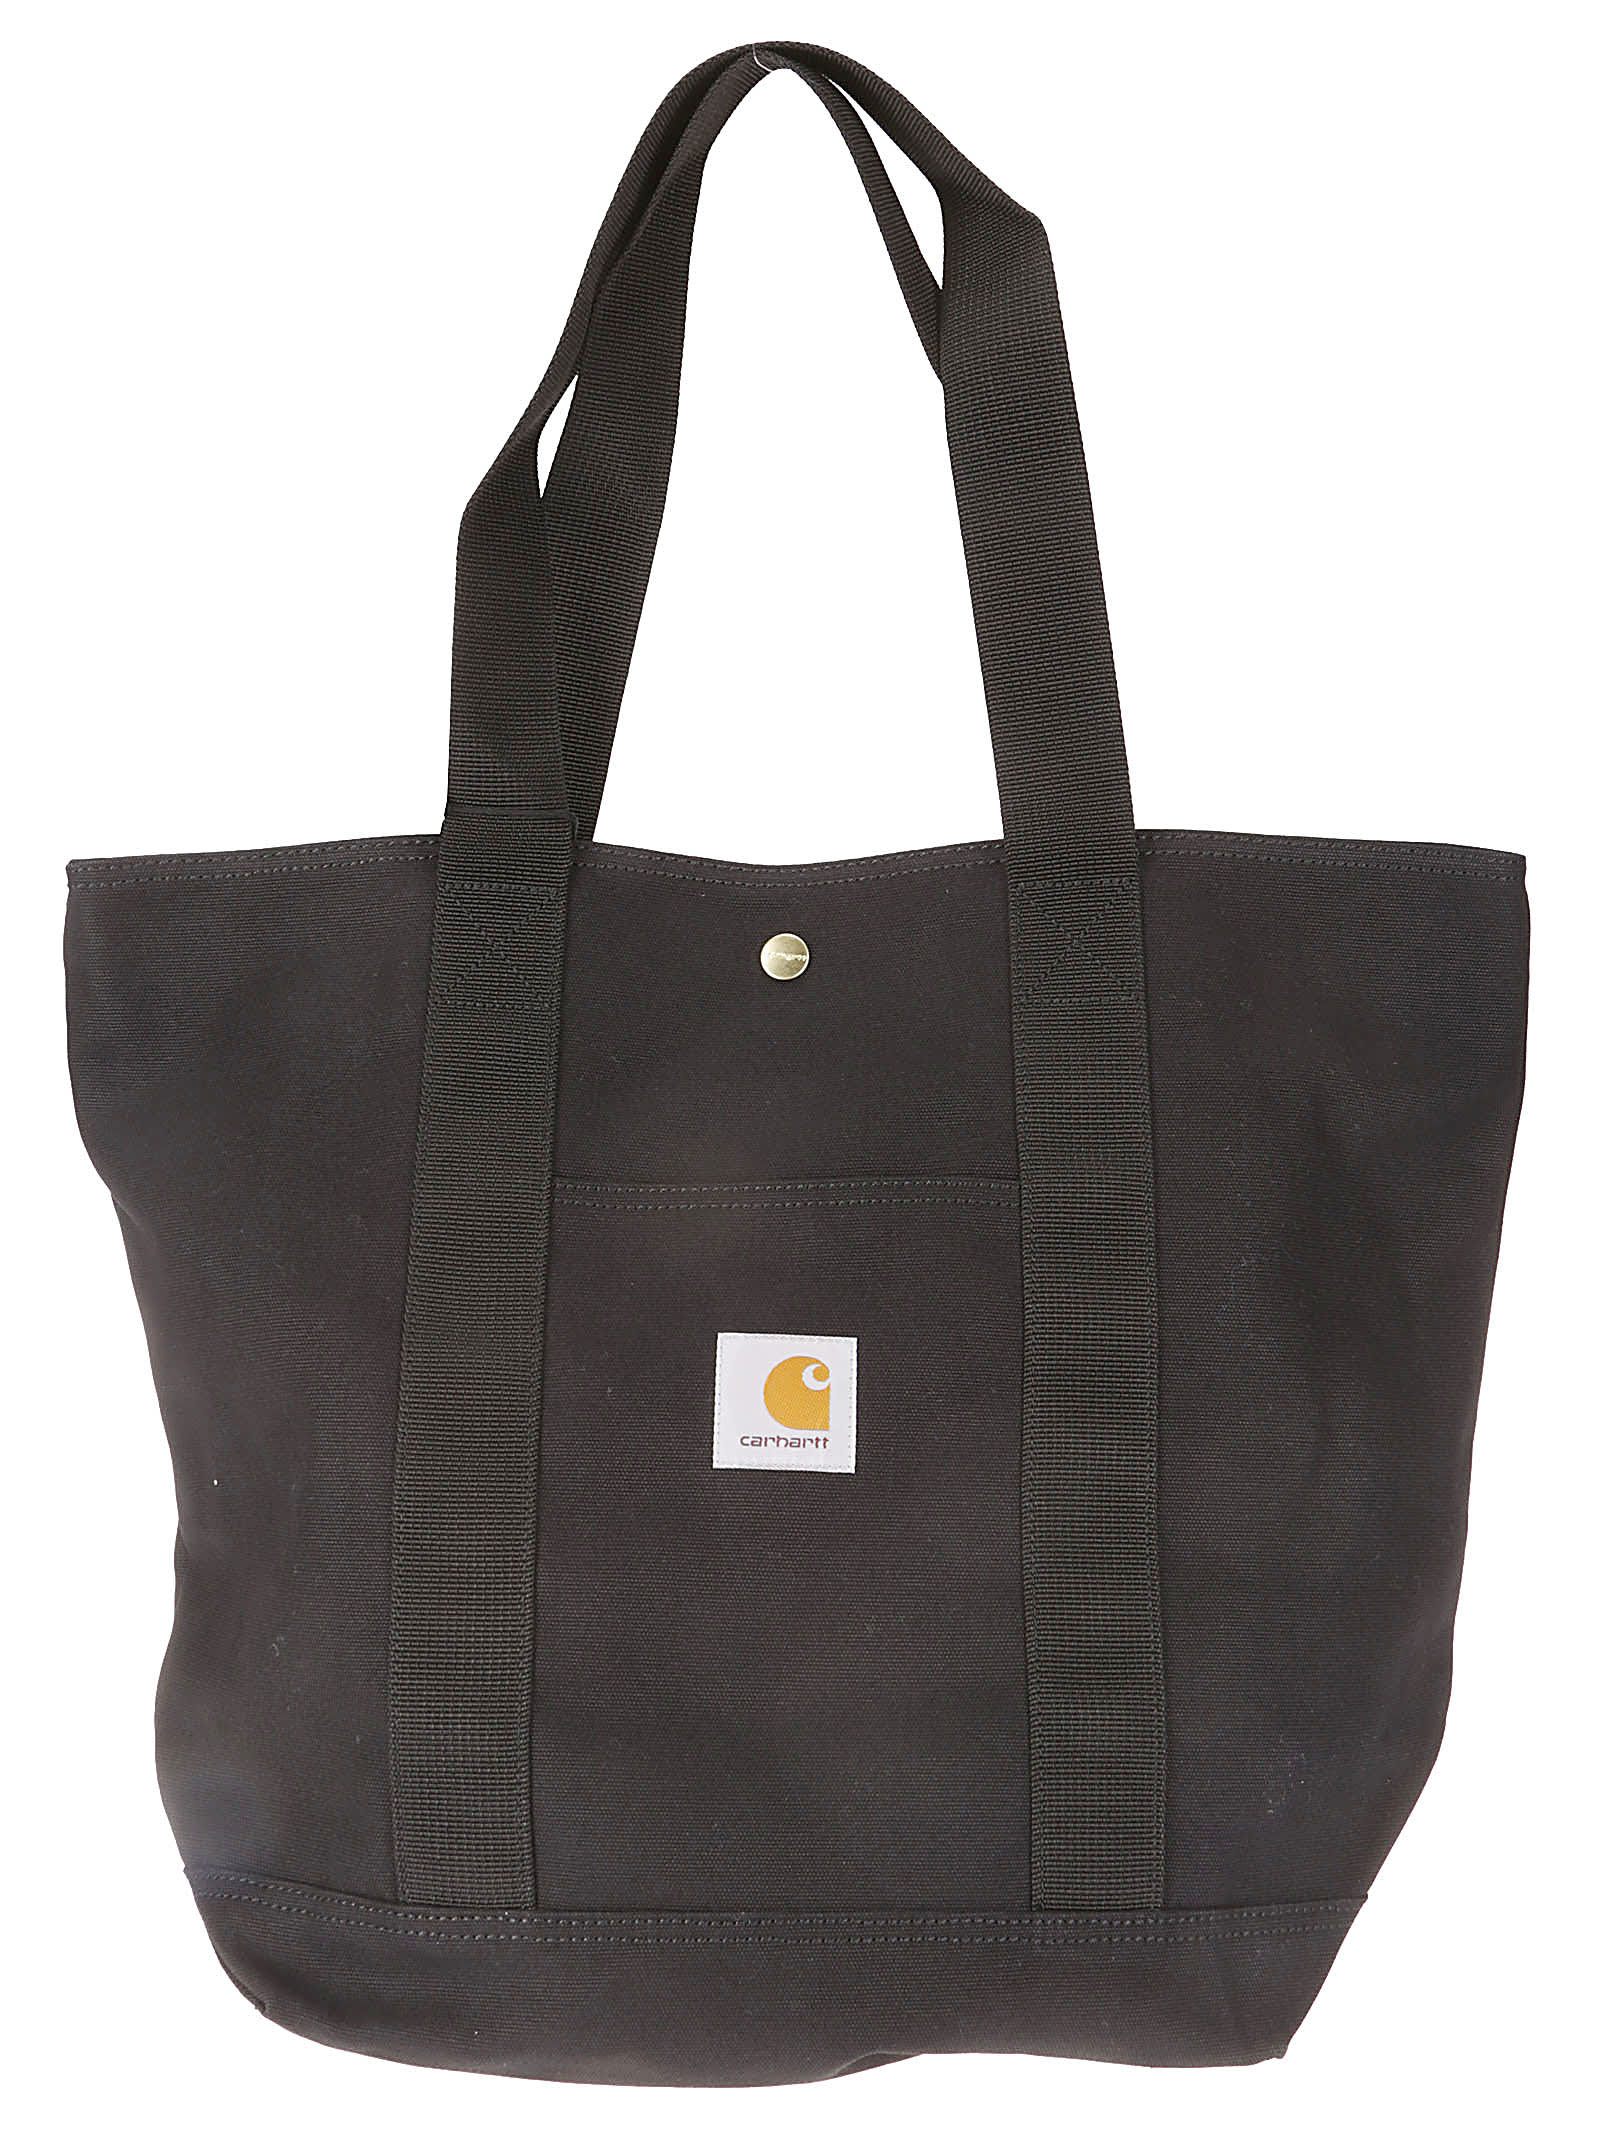 Carhartt Canvas Tote Dearborn In Rinsed Black